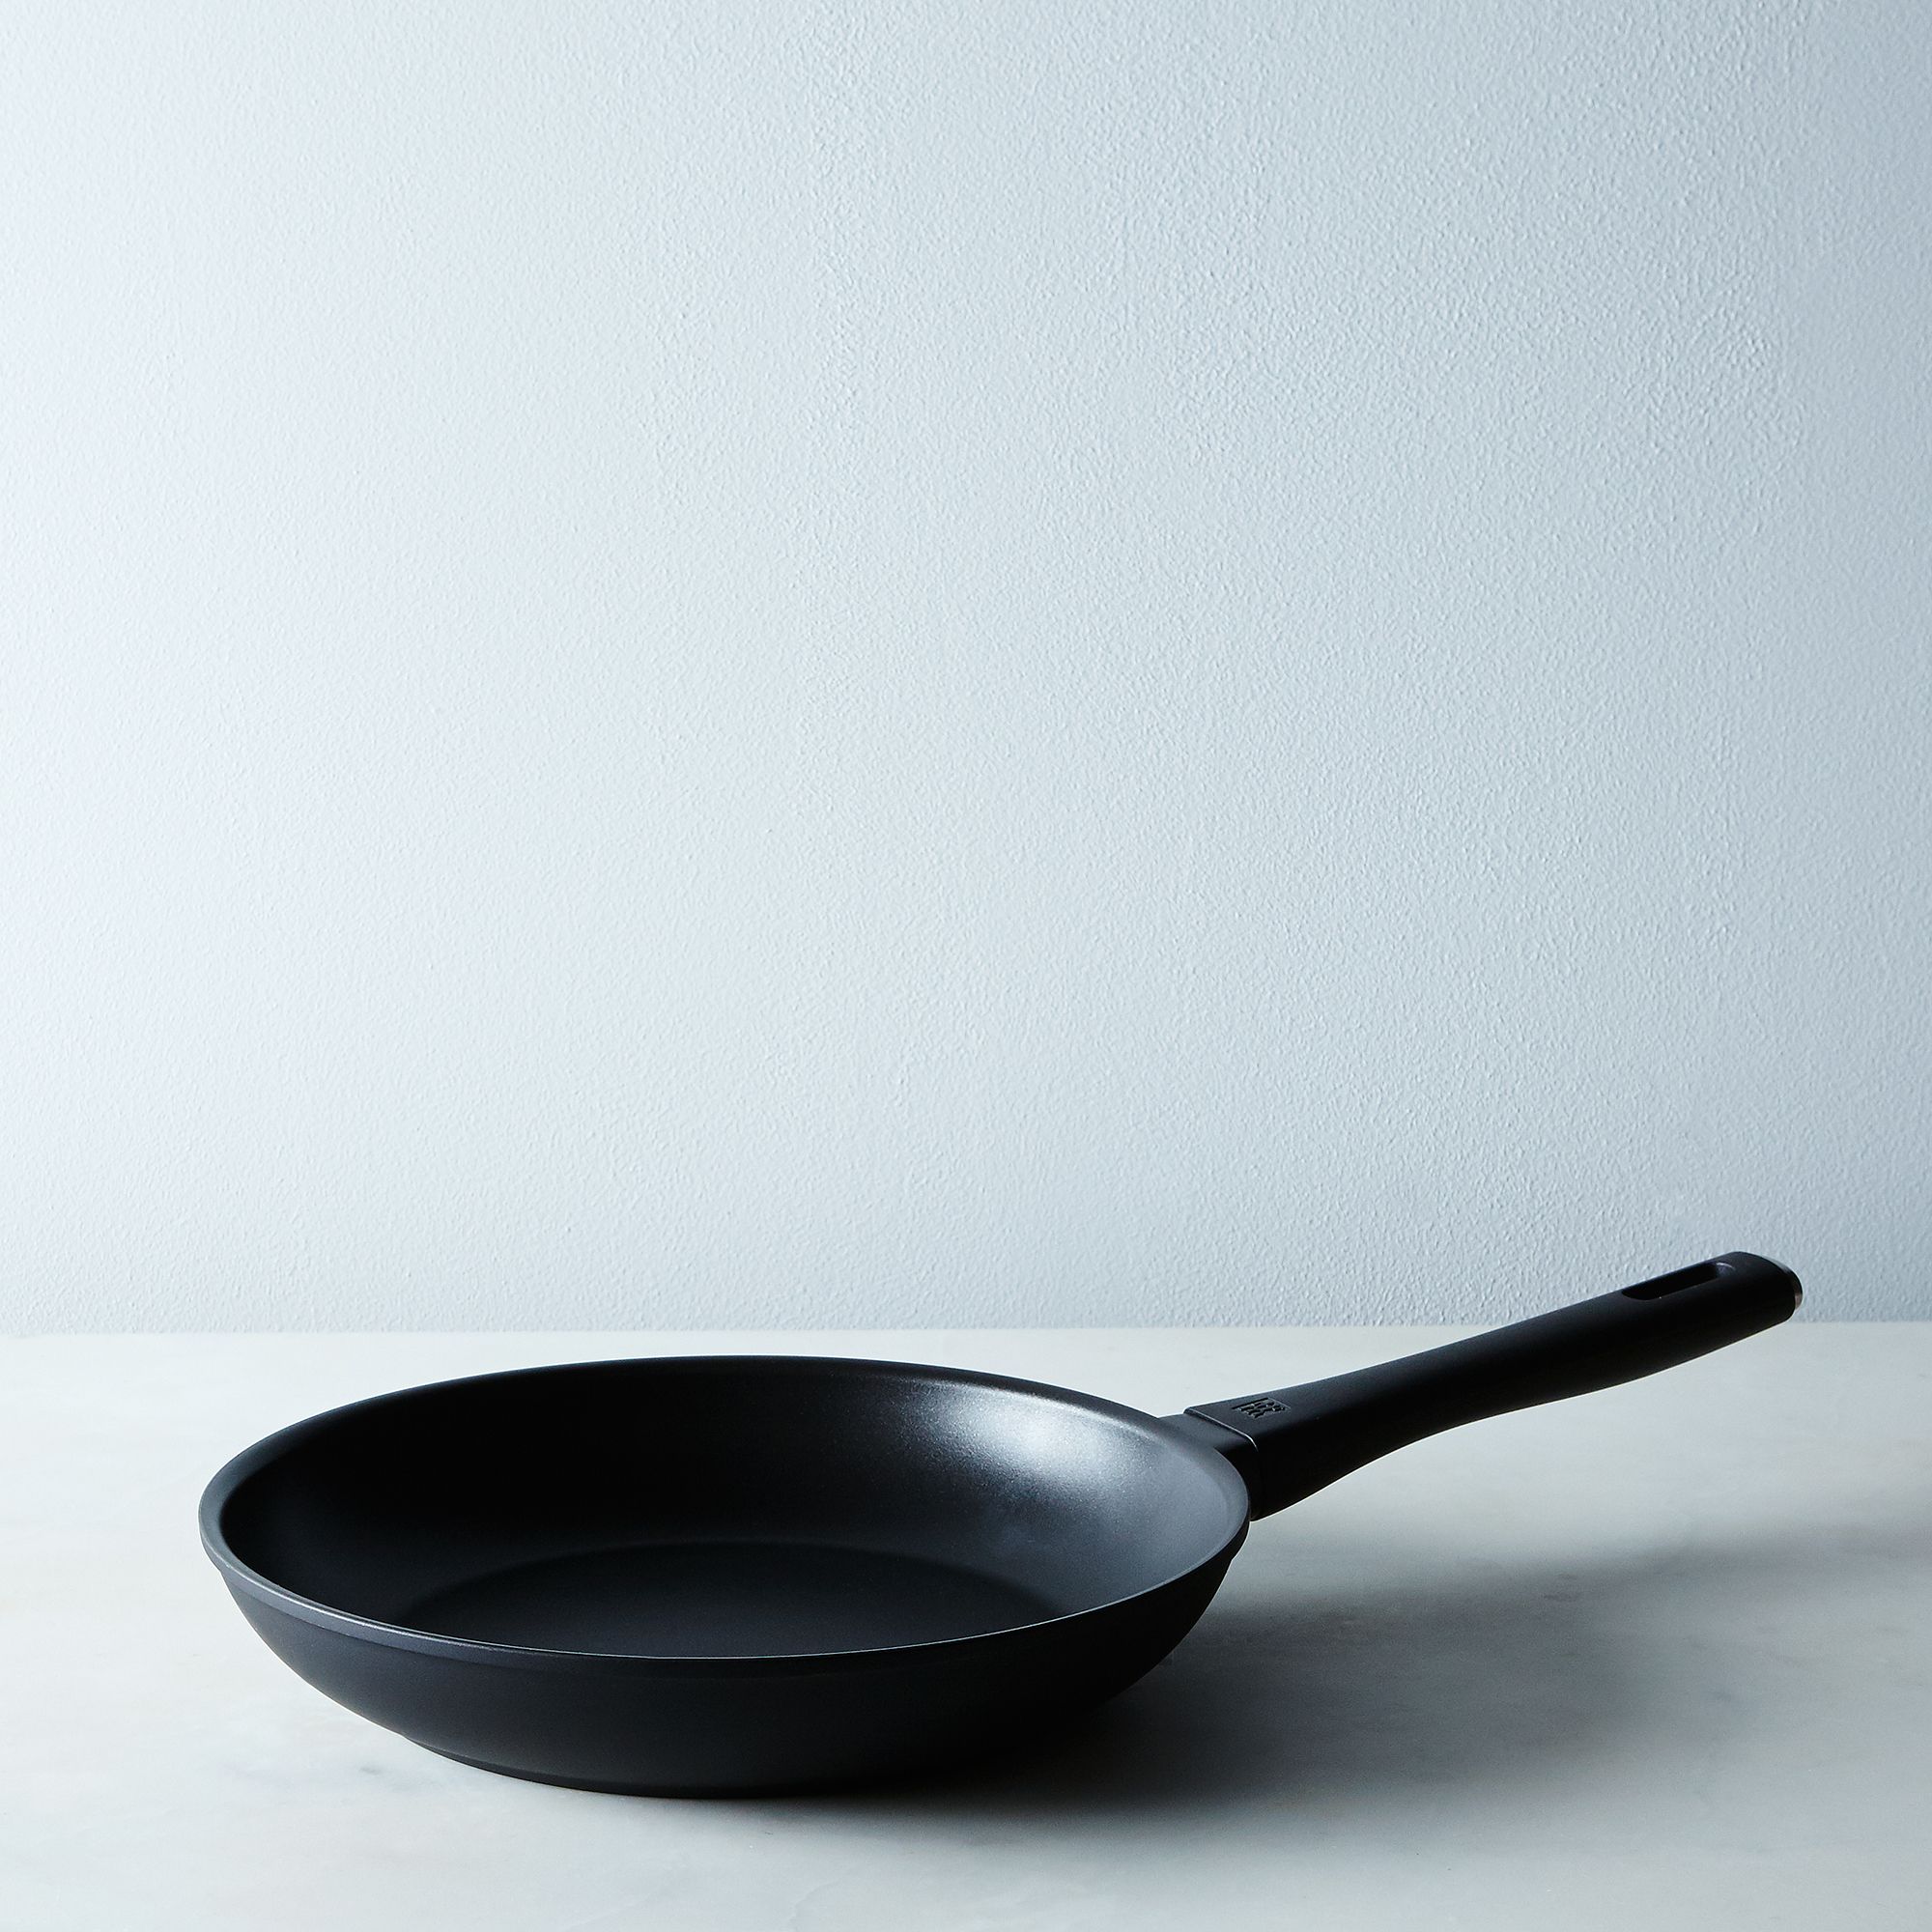 Cookware by Sarah Lusk